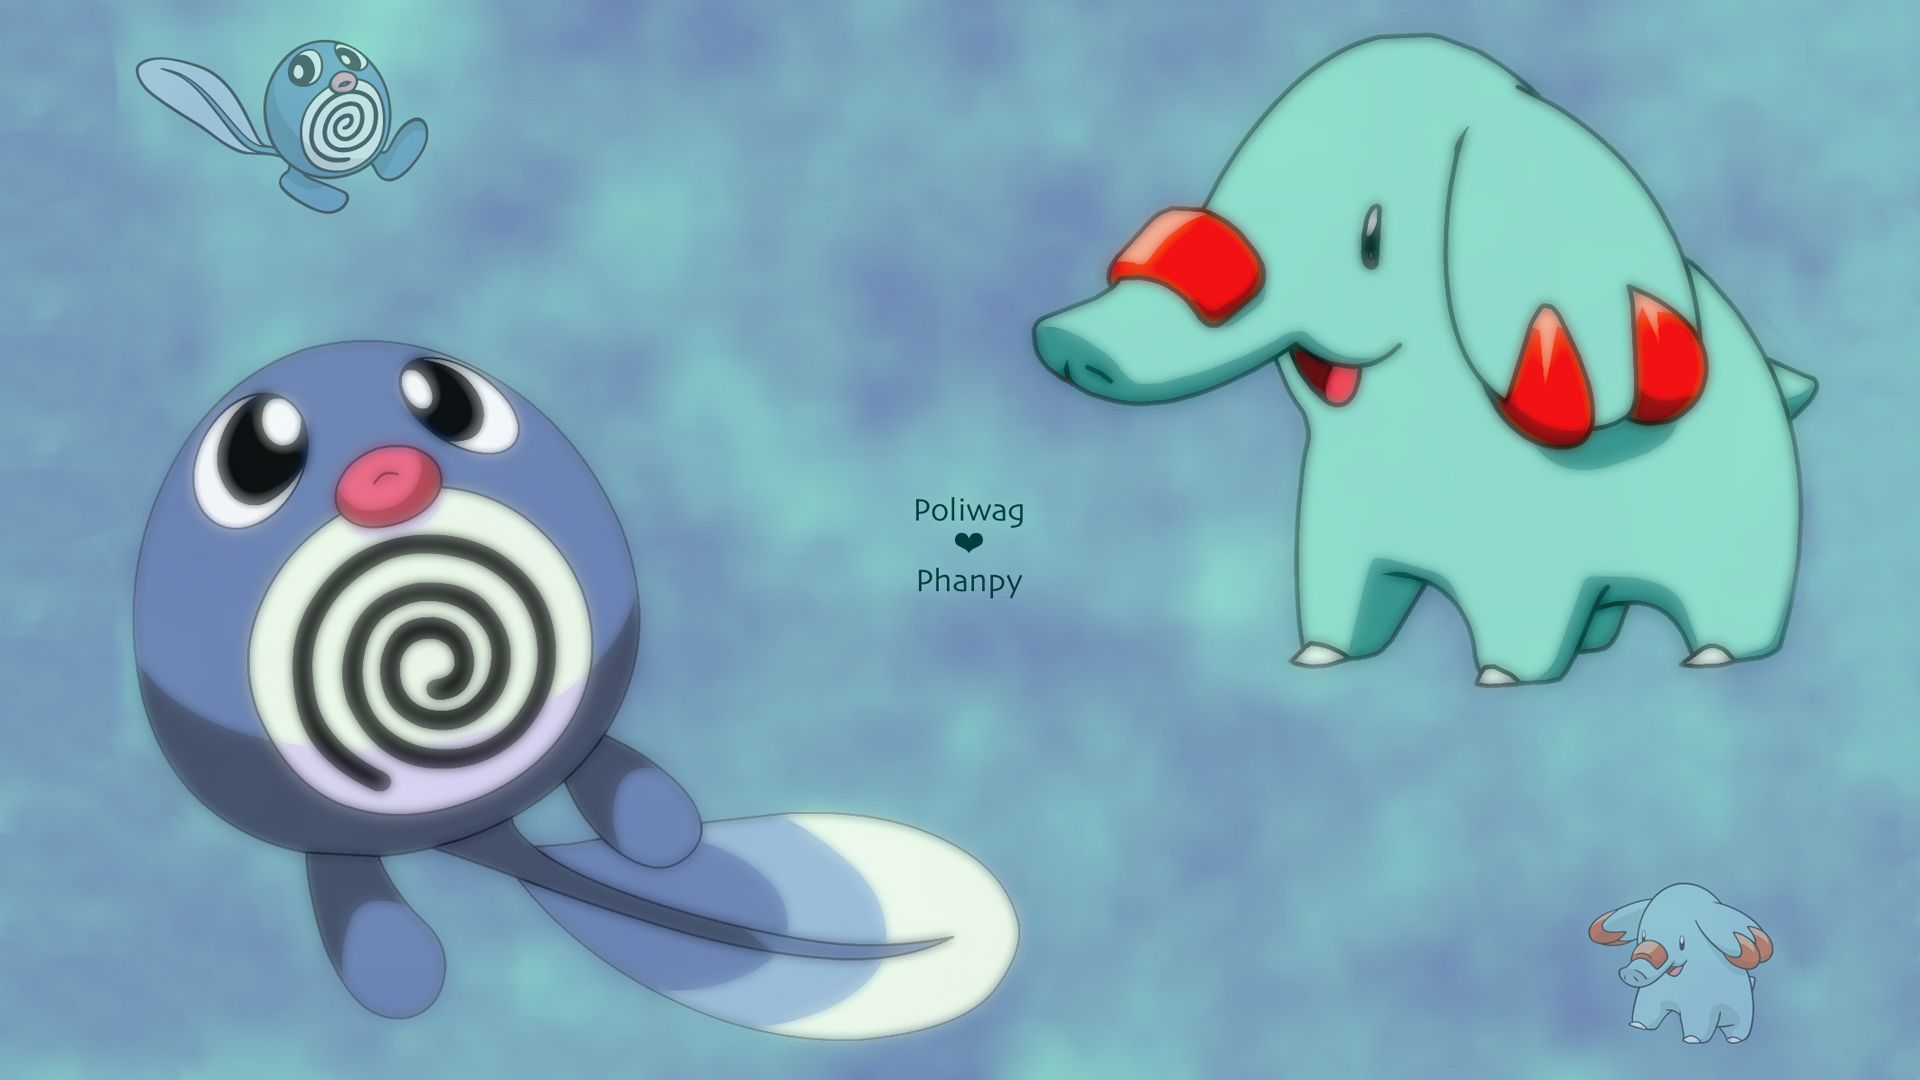 Phanpy Wallpaper Image Photos Pictures Background